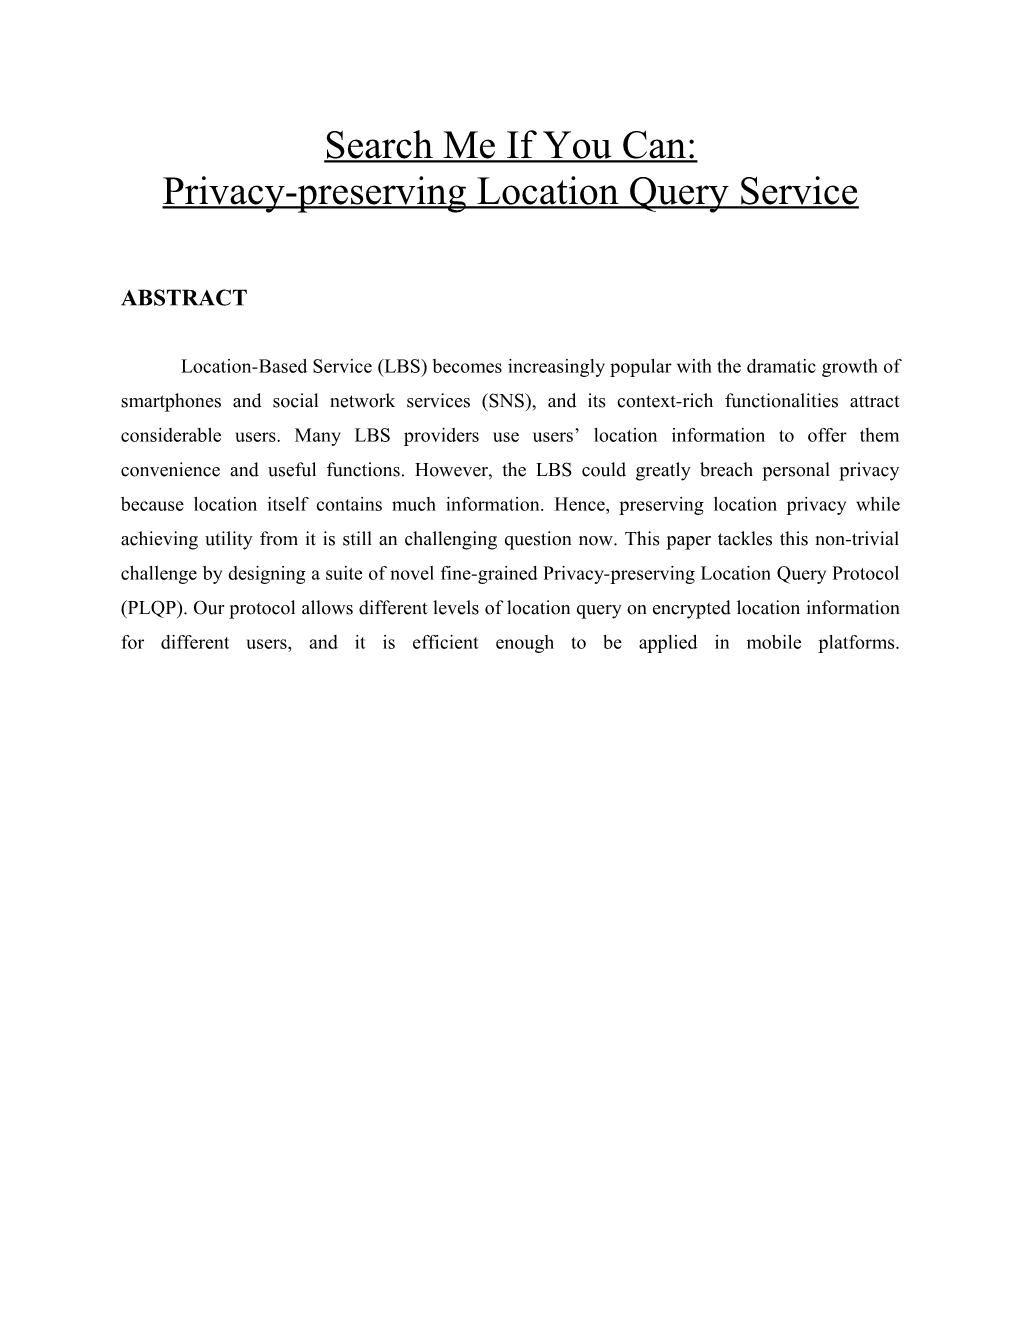 Privacy-Preserving Location Query Service